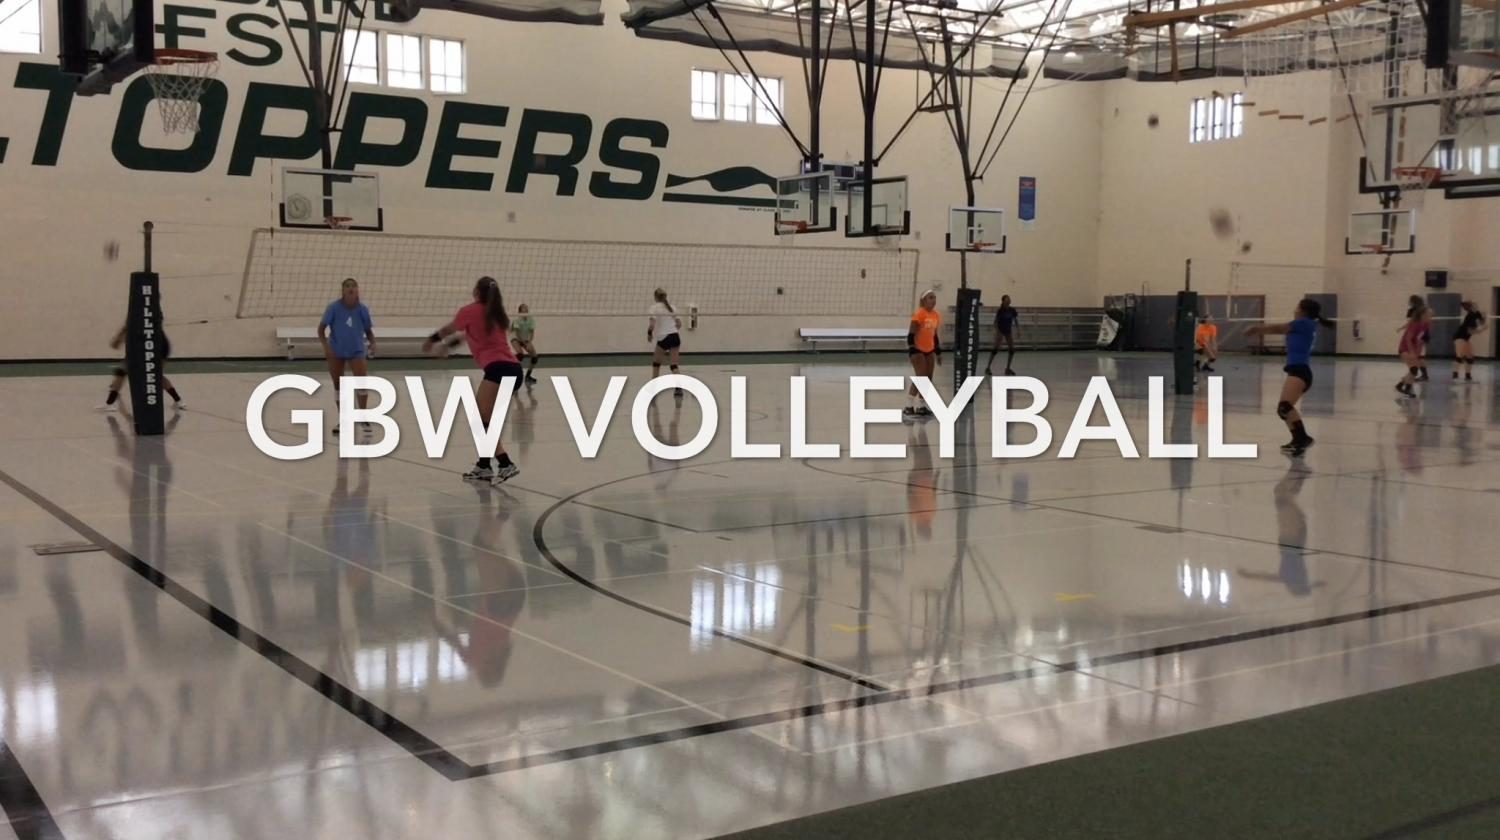 Get the Latest News on GBW Girls Volleyball!